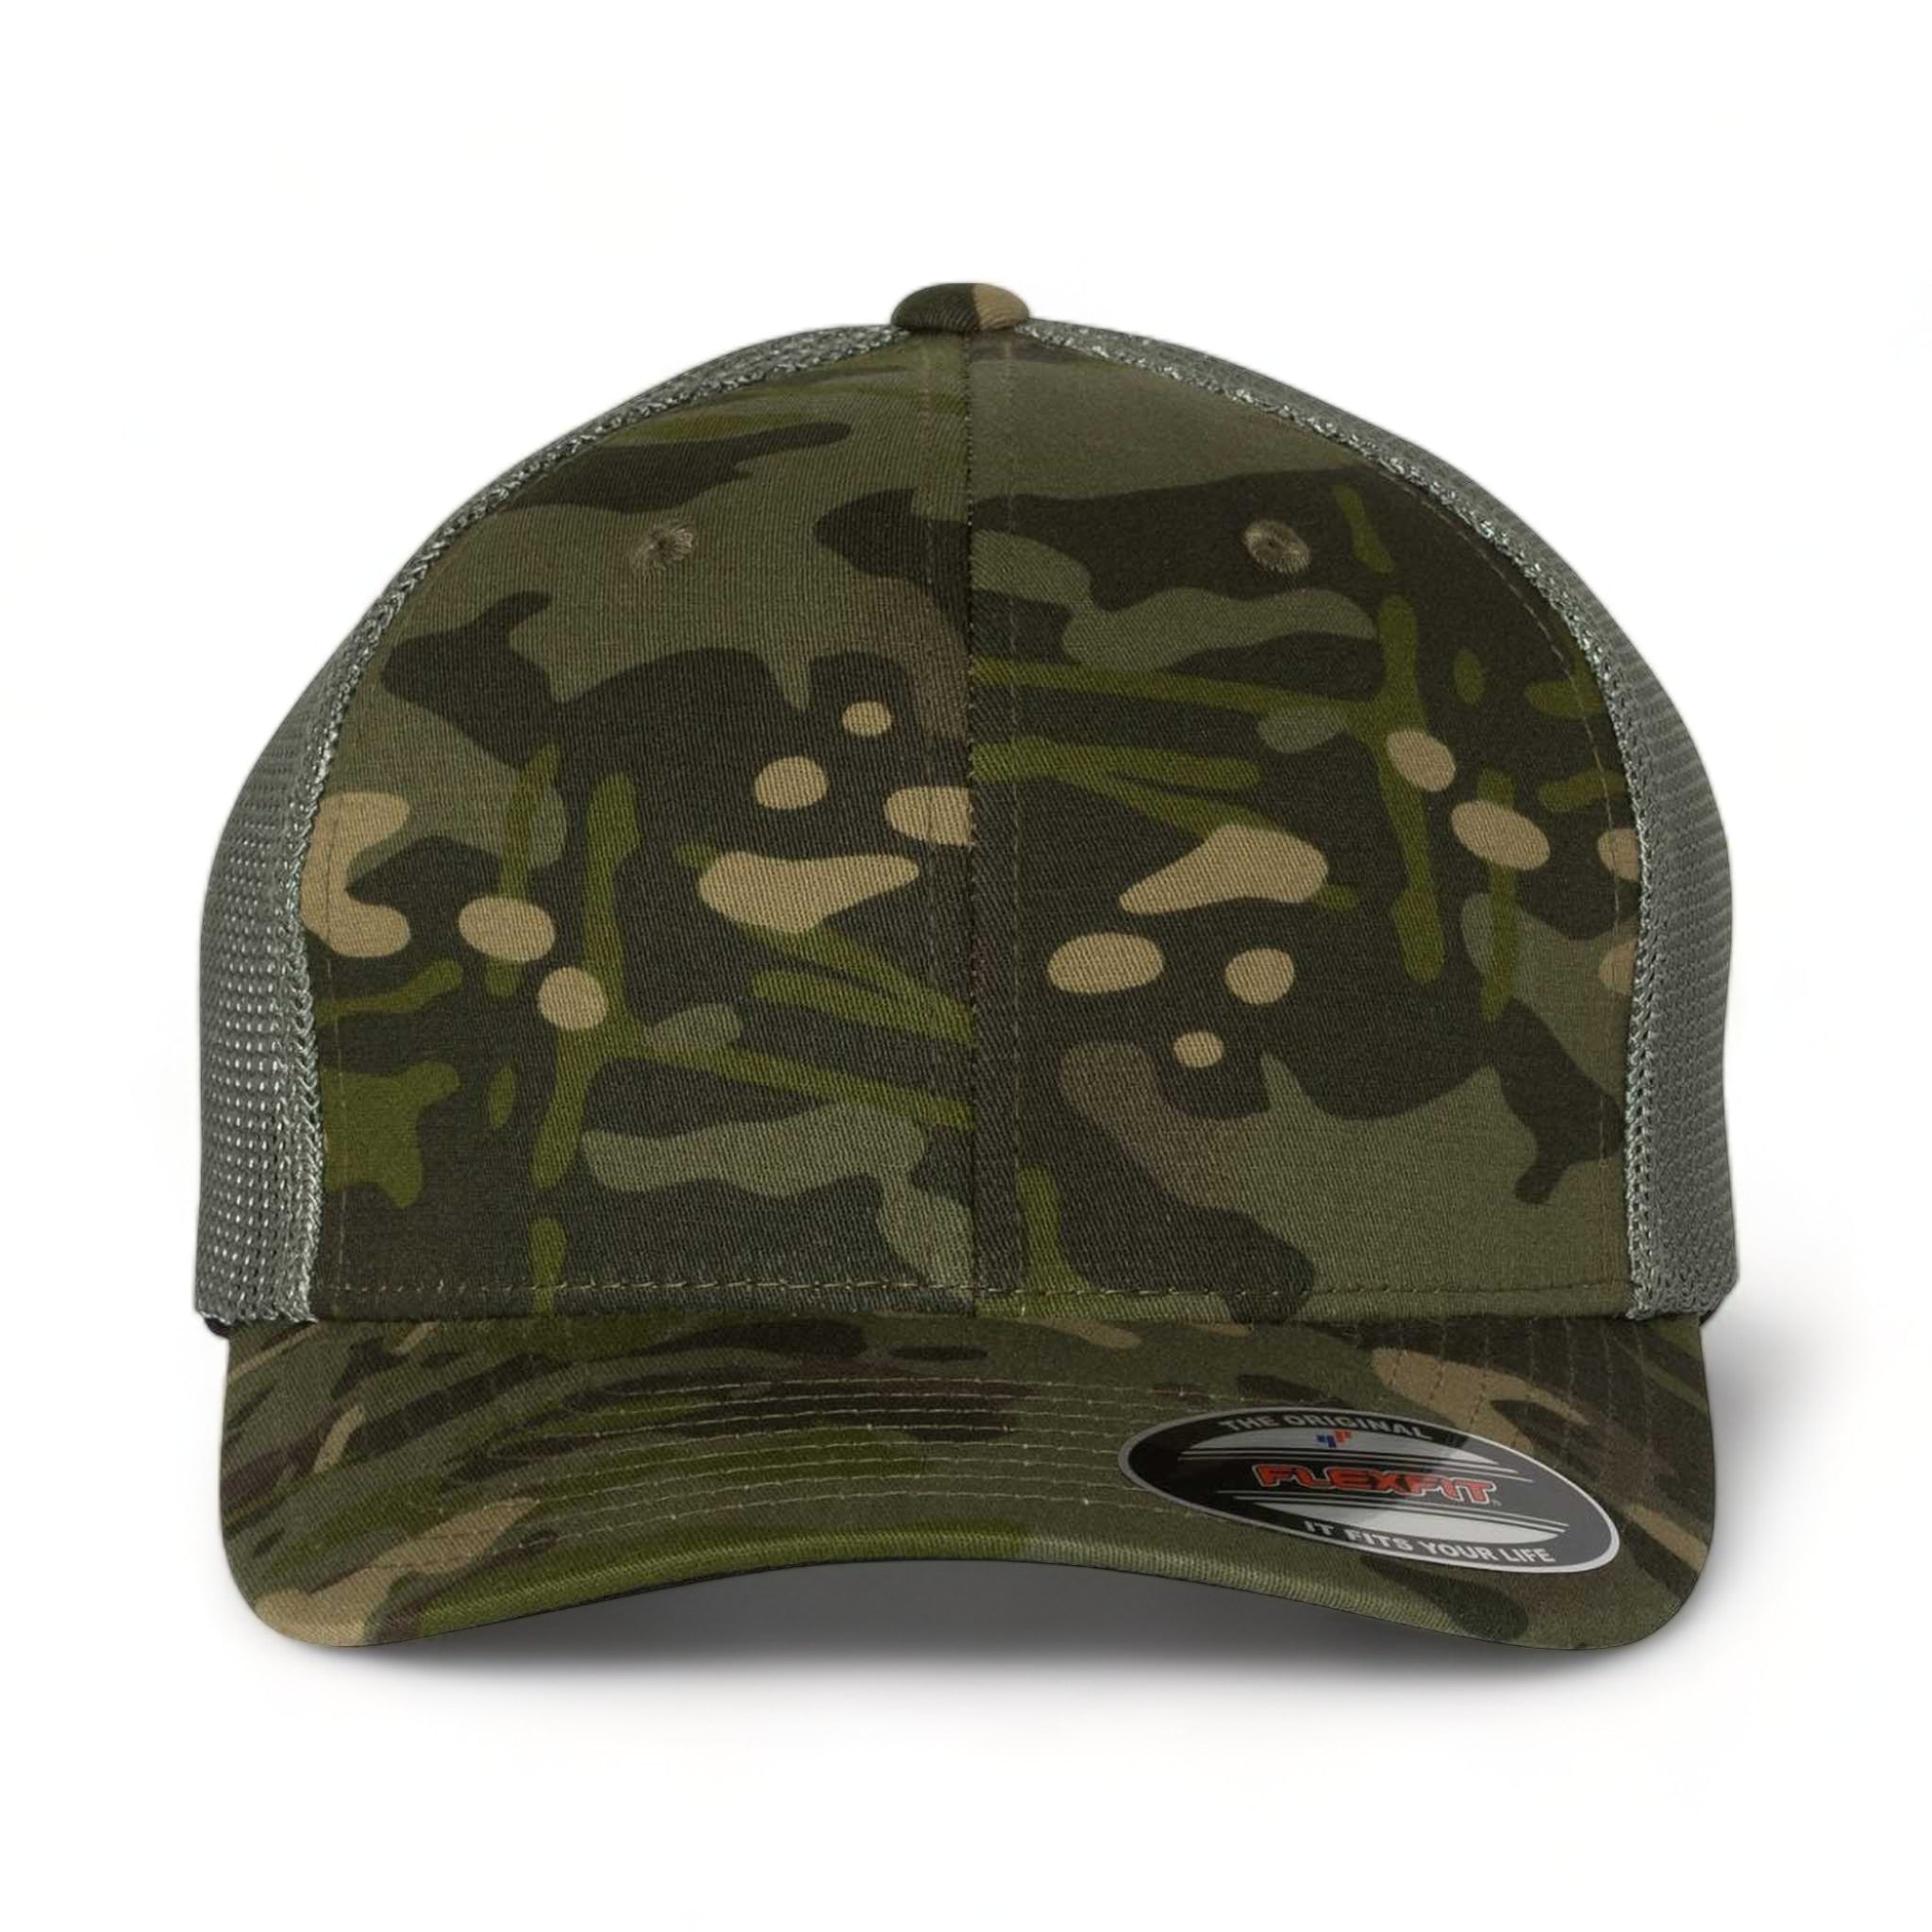 Front view of Flexfit 6511 custom hat in multicam tropic and green